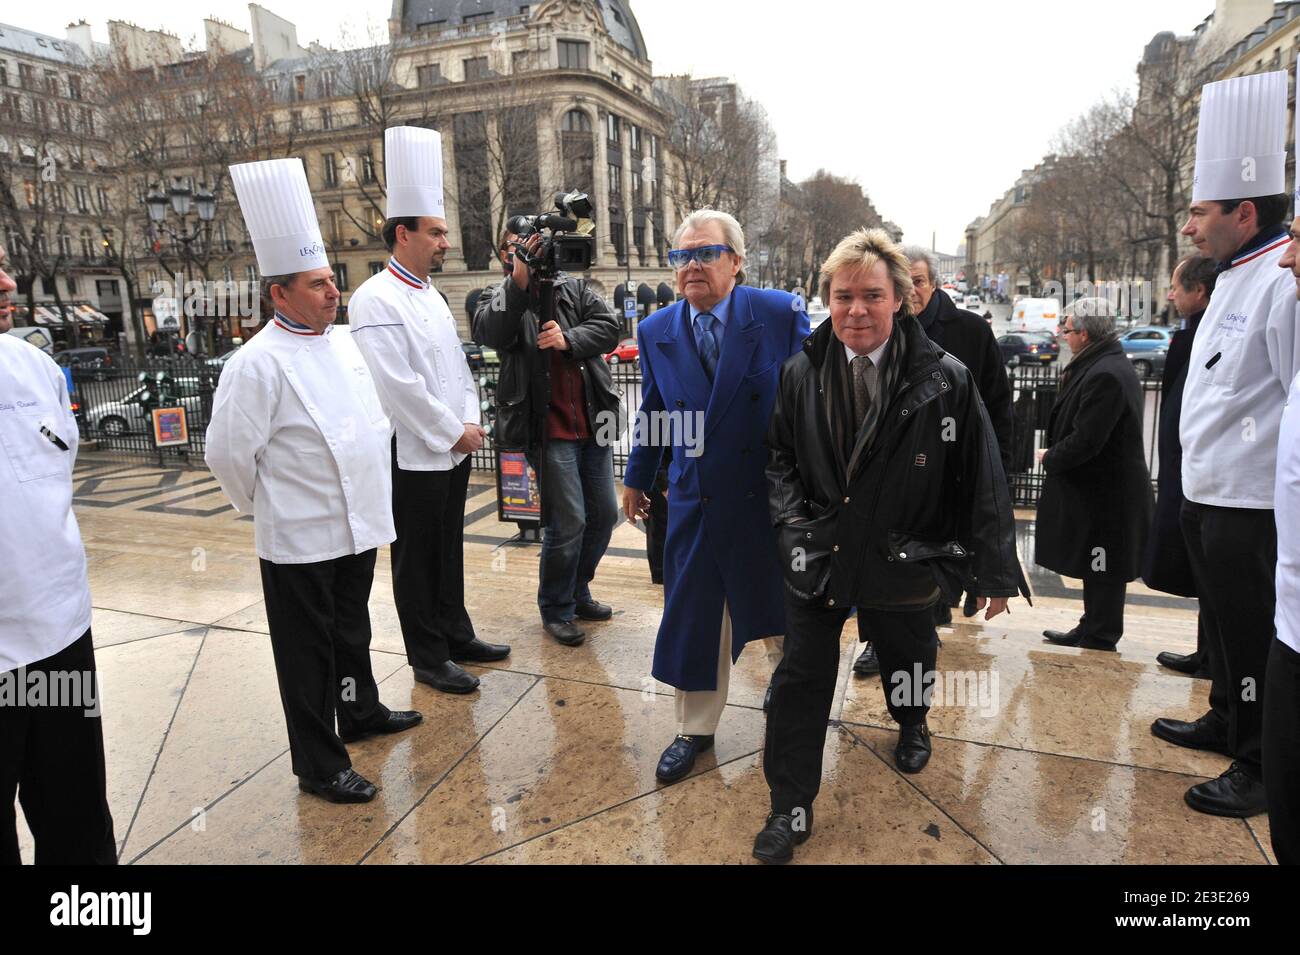 Michou and Yvan arriving at the tribute to French master pastry chef Gaston Lenotre during a mass at the Madeleine church in Paris, France on January 13, 2009. Gaston Lenotre, who built a worldwide empire with his gourmet dessert creations that defined modern patisserie, died on January 8, 2009 at the age of 88. Photo by Mousse/ABACAPRESS.COM Stock Photo